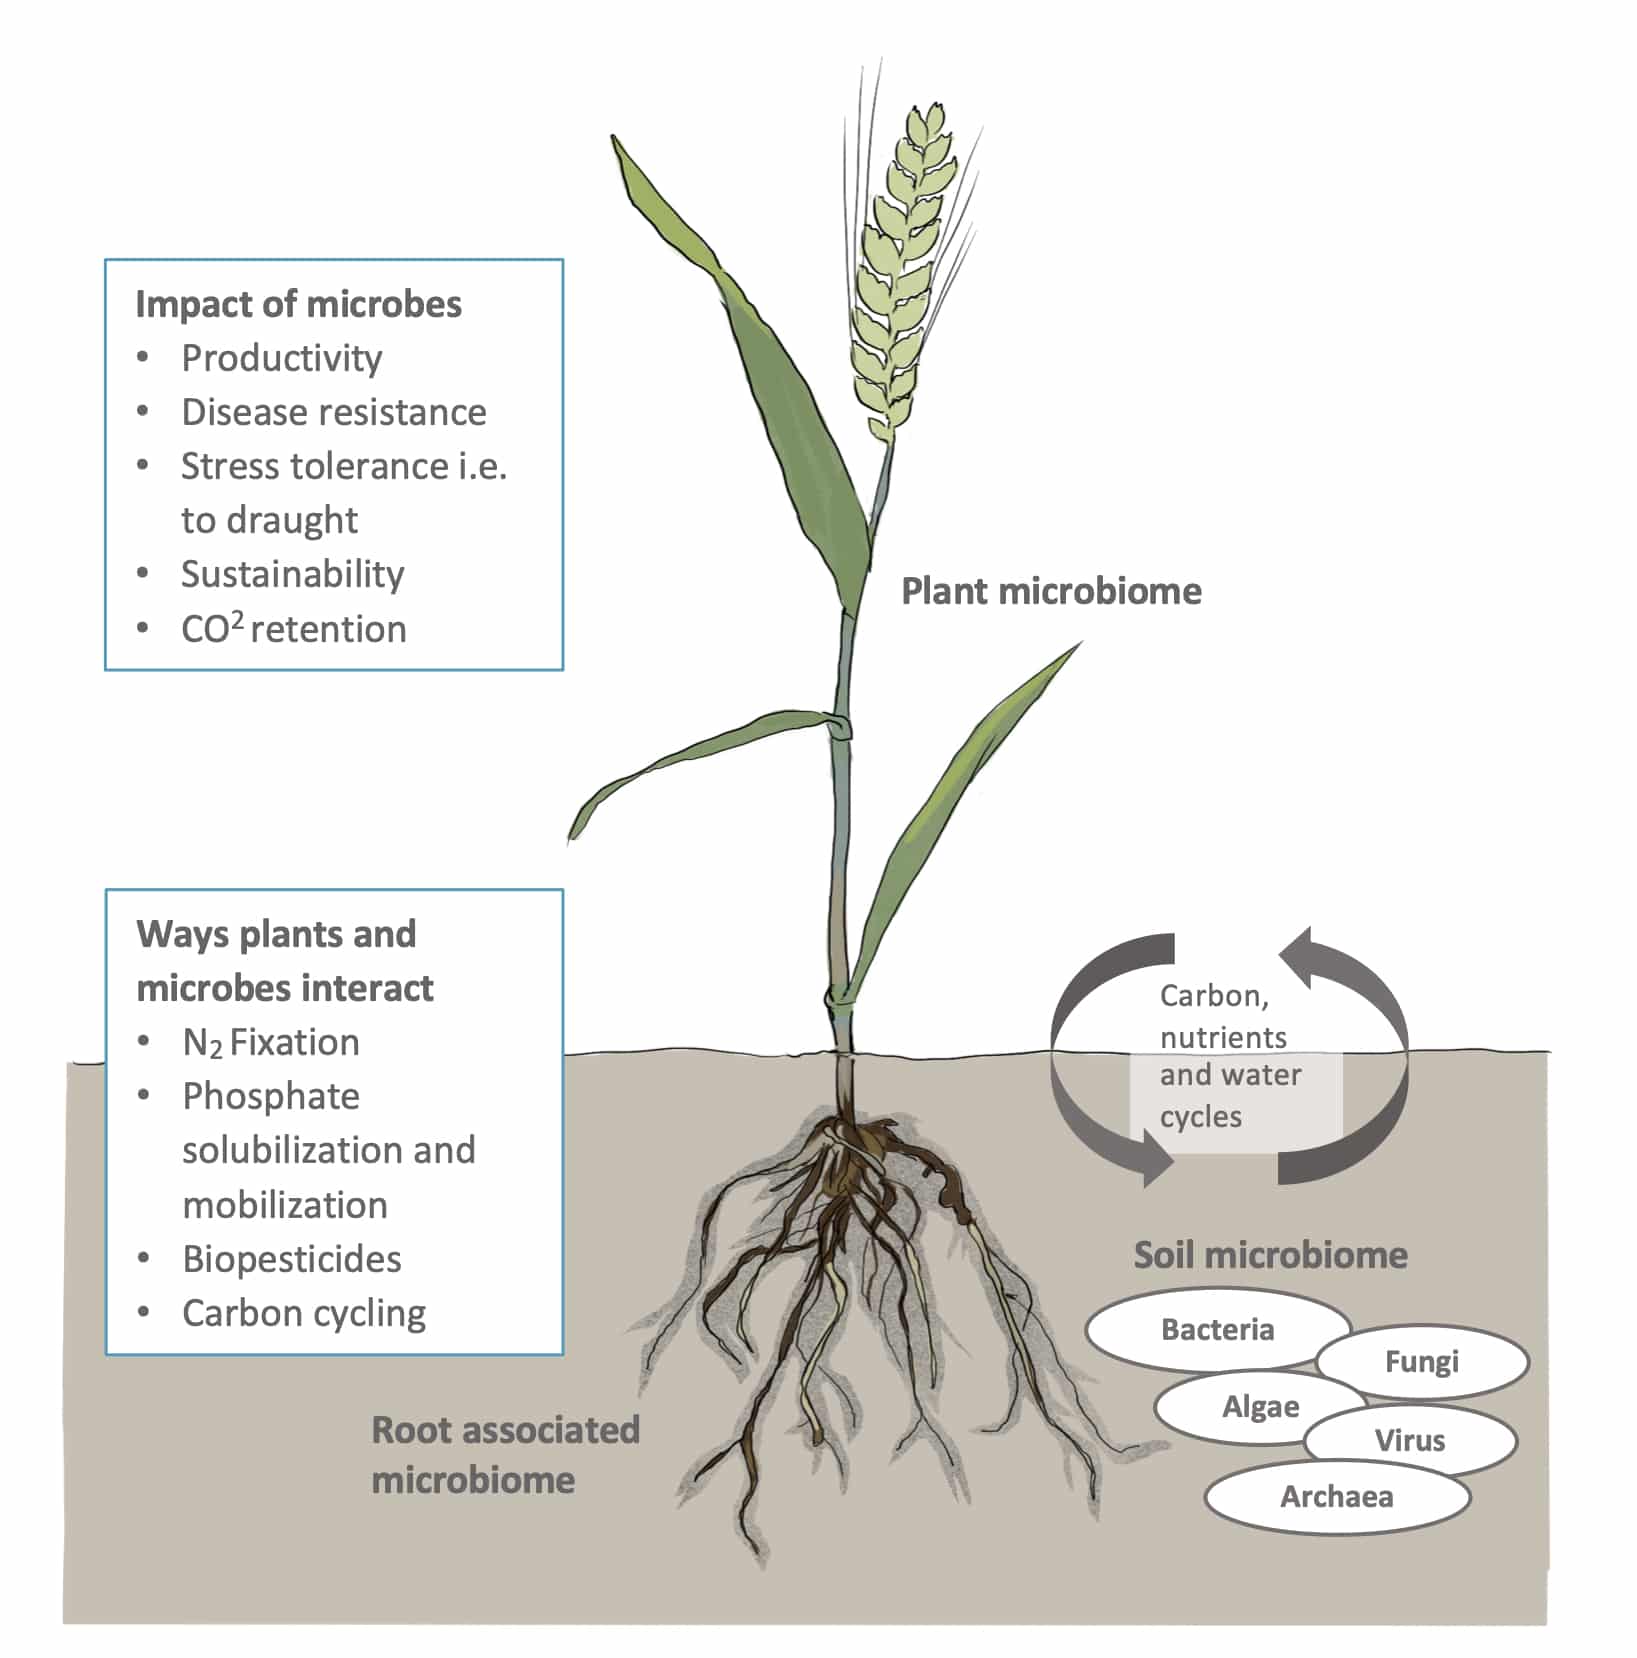 Illustration - plant and soil microbiome